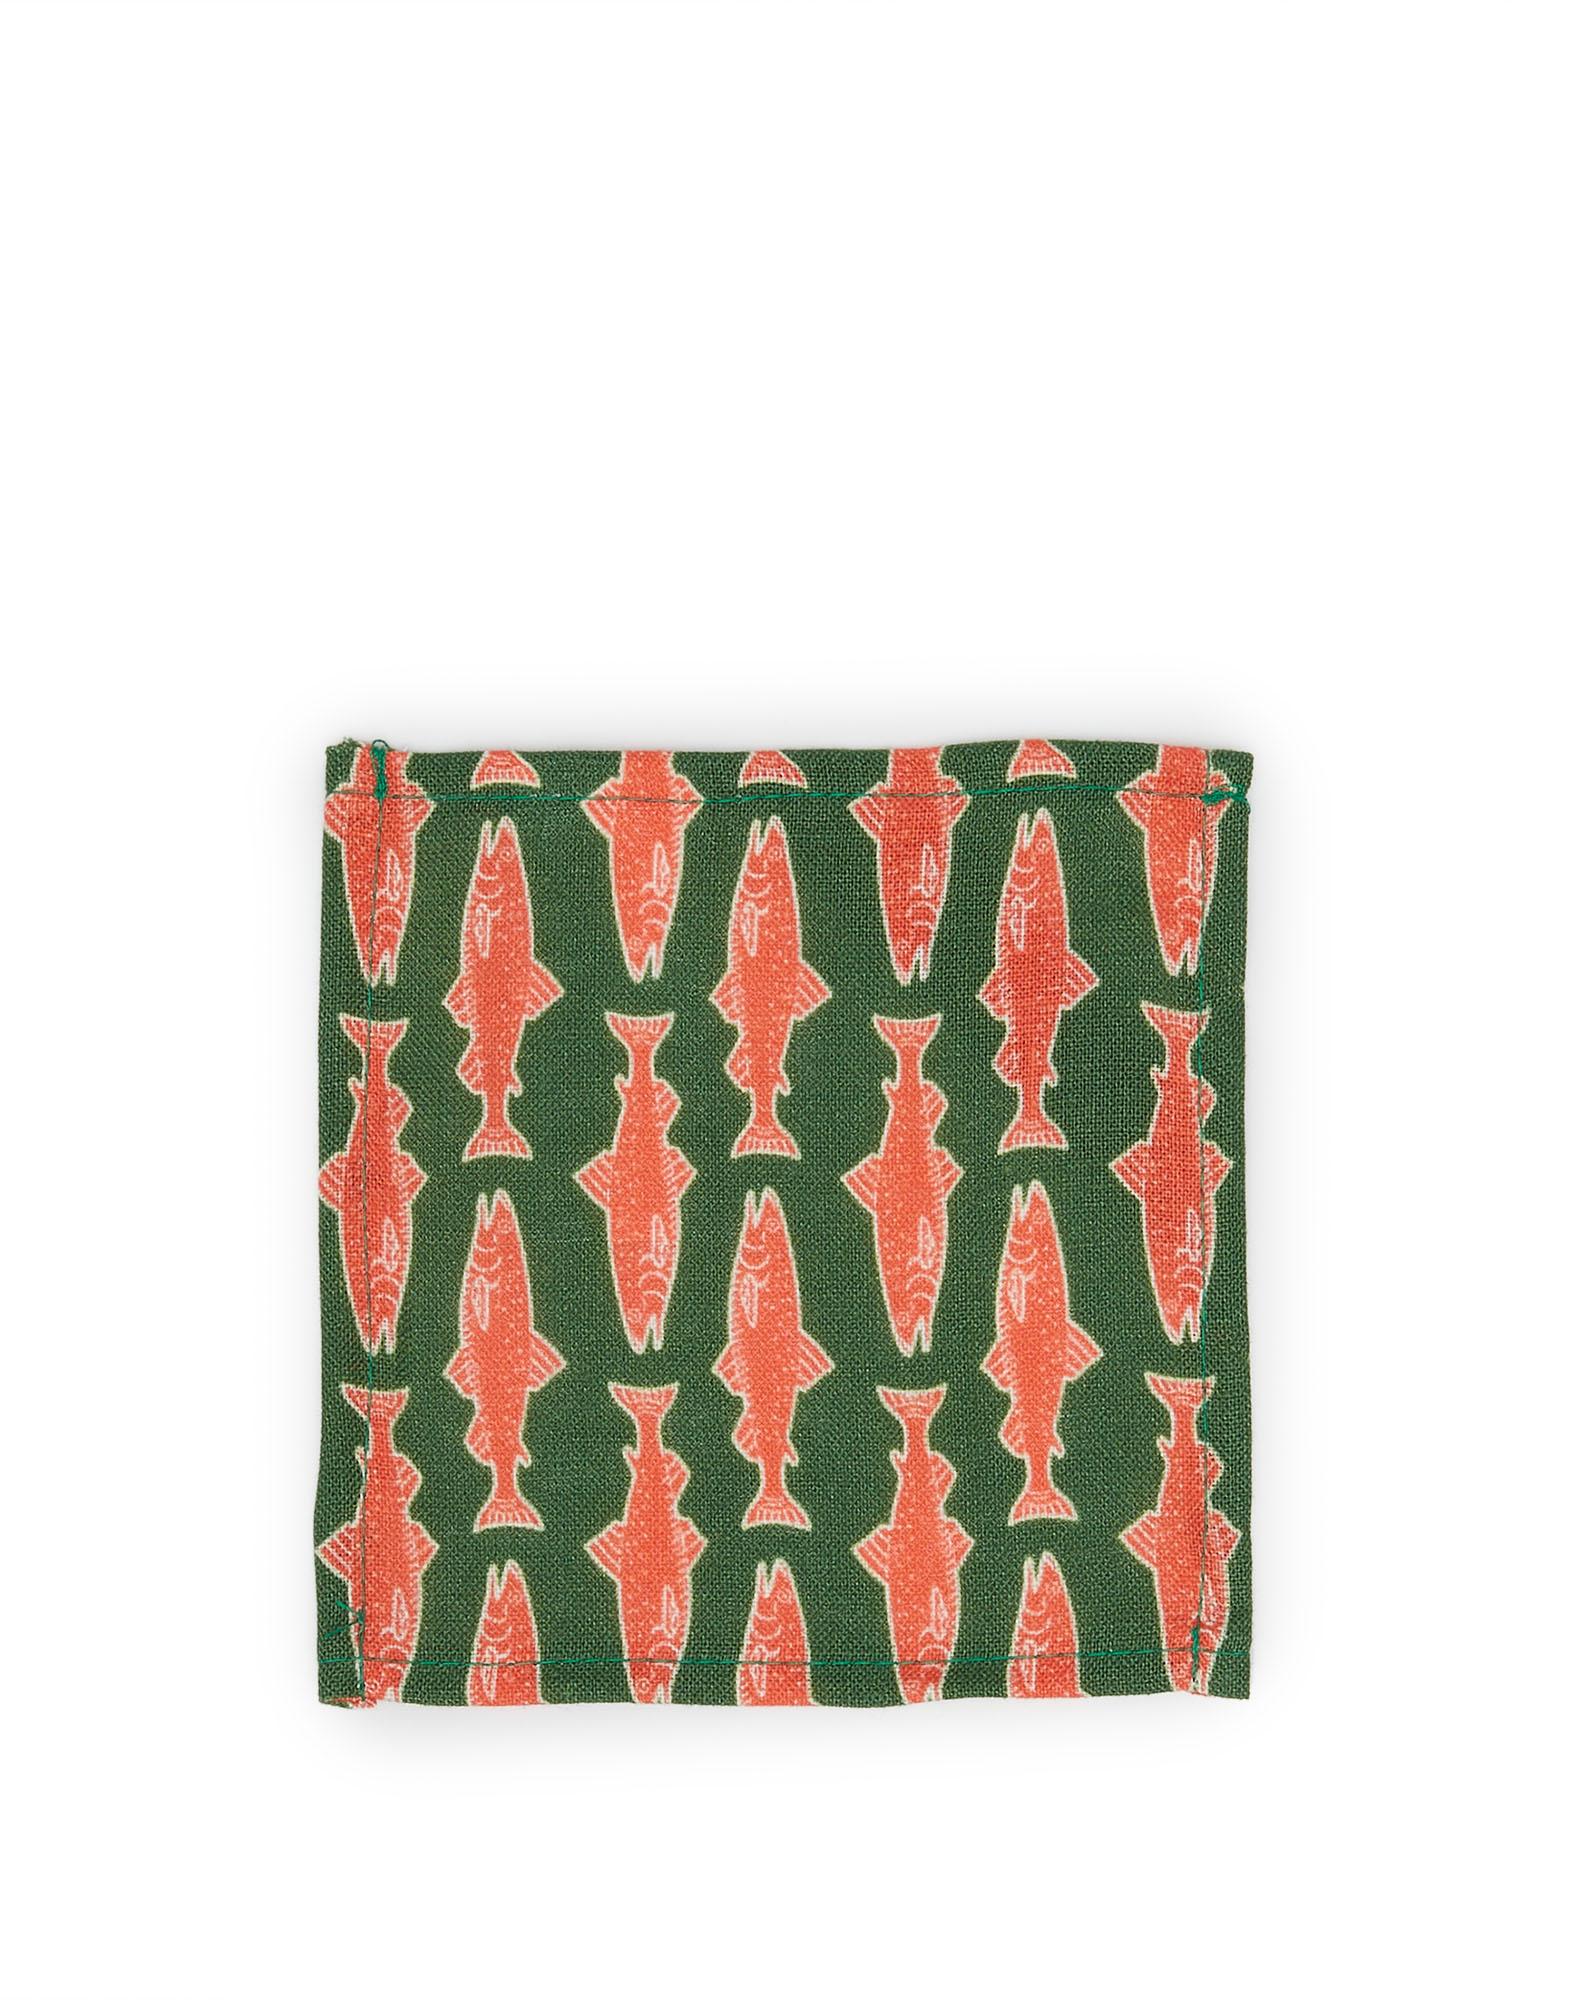 No aperitivo party is complete without charming cocktail napkins, si? Si! This set of four are as crisp as can be and, in a fabulous collaboration with Como’s latest hotel hotspot Passalacqua, arrive in opulent new motifs to mix and match for a